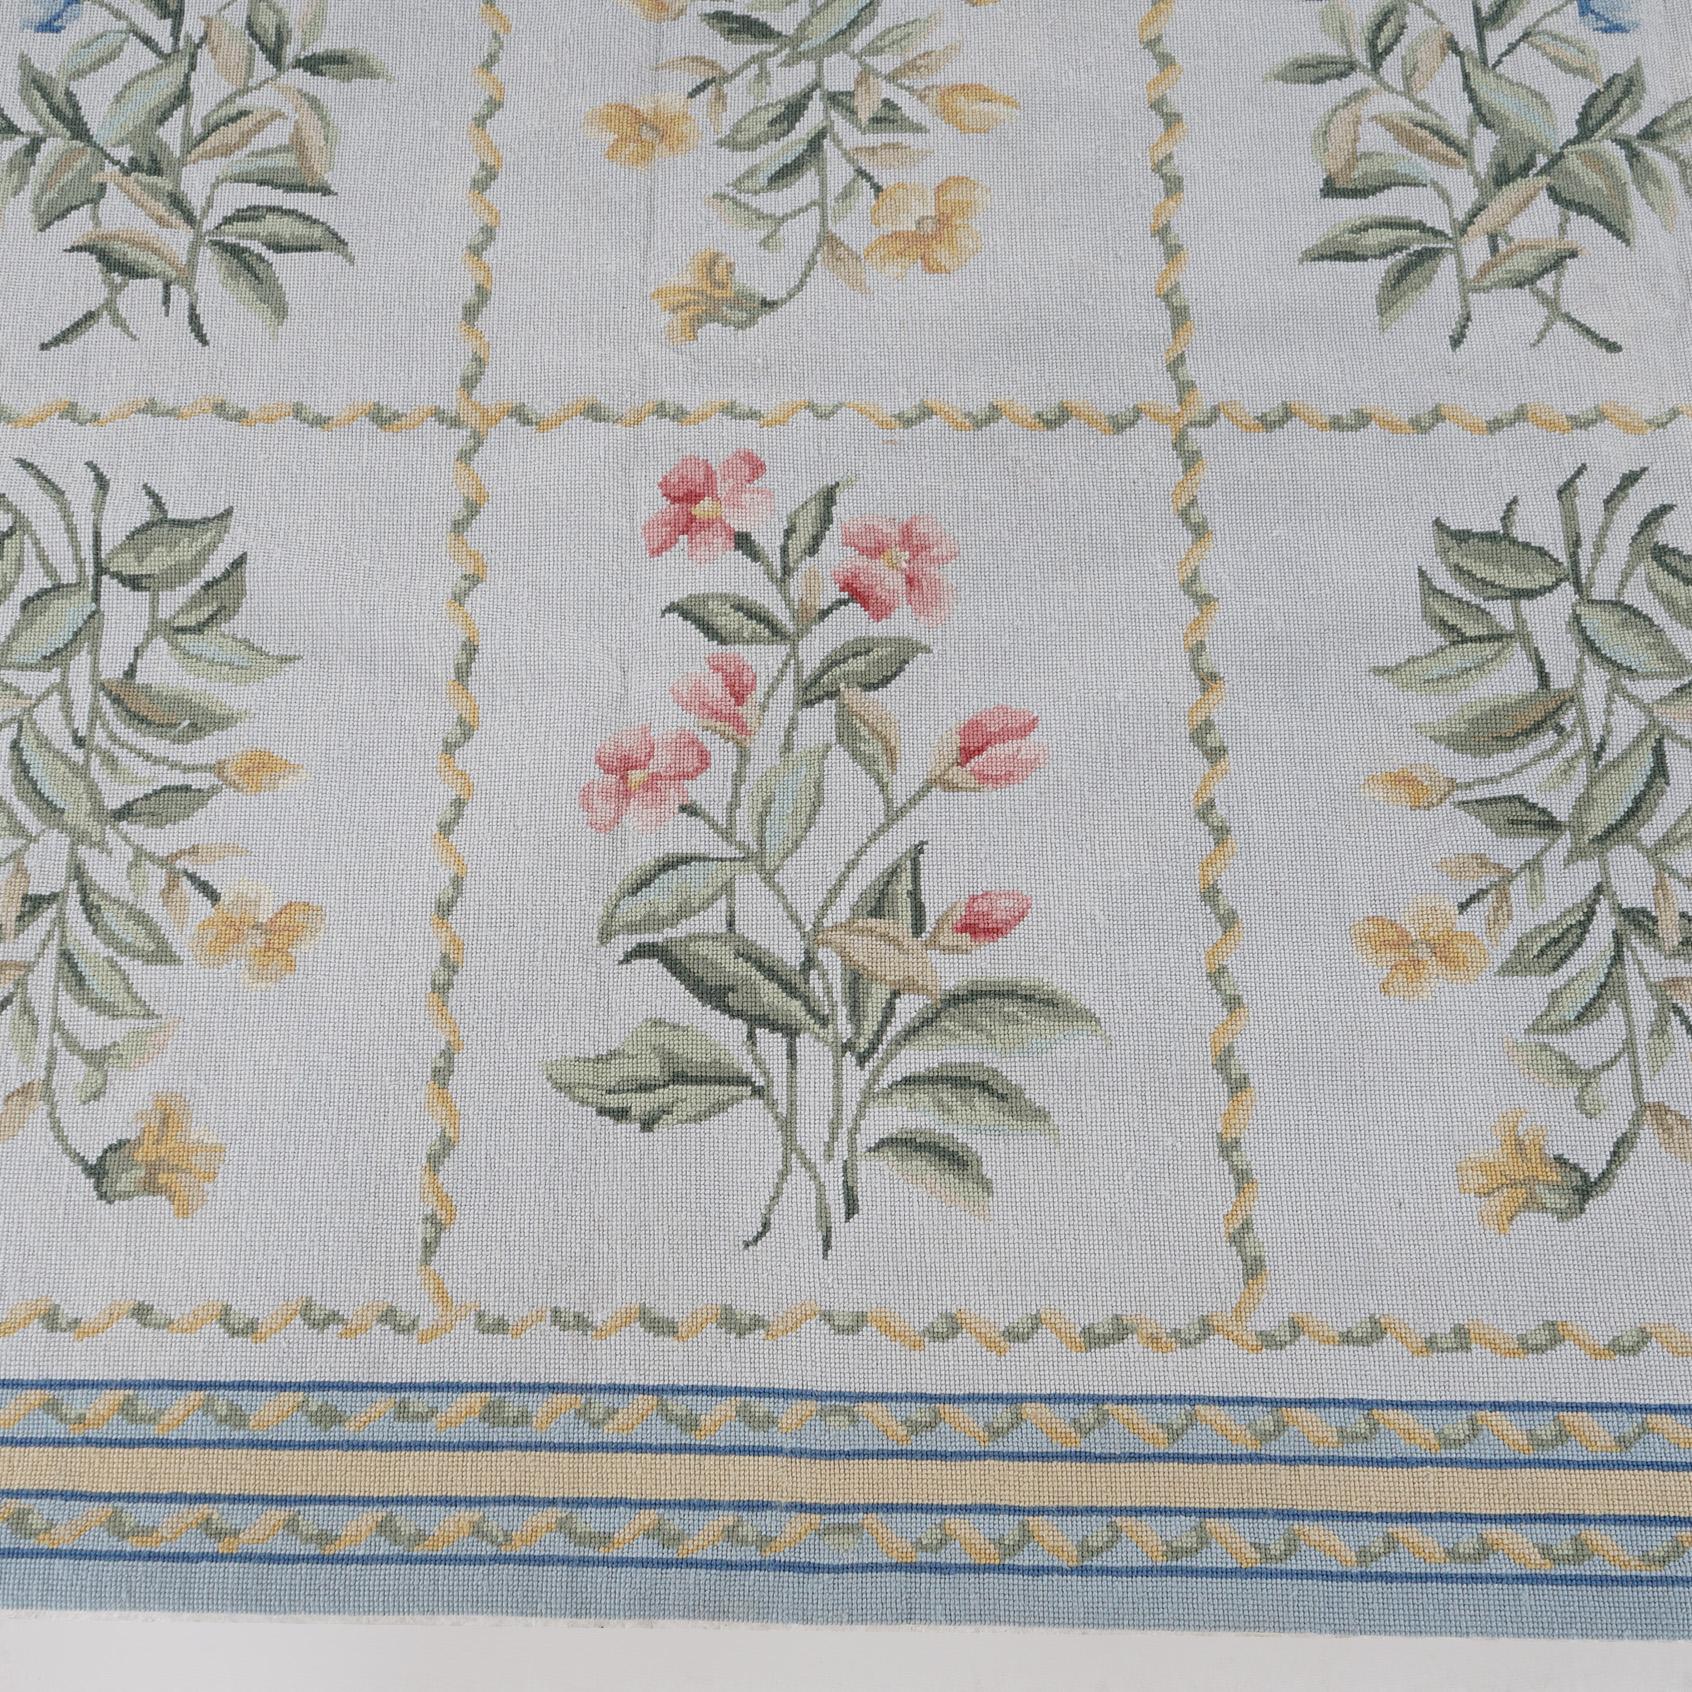 20th Century French Aubusson Needlepoint Room Size Paneled Floral Garden Wool Rug 20th C For Sale